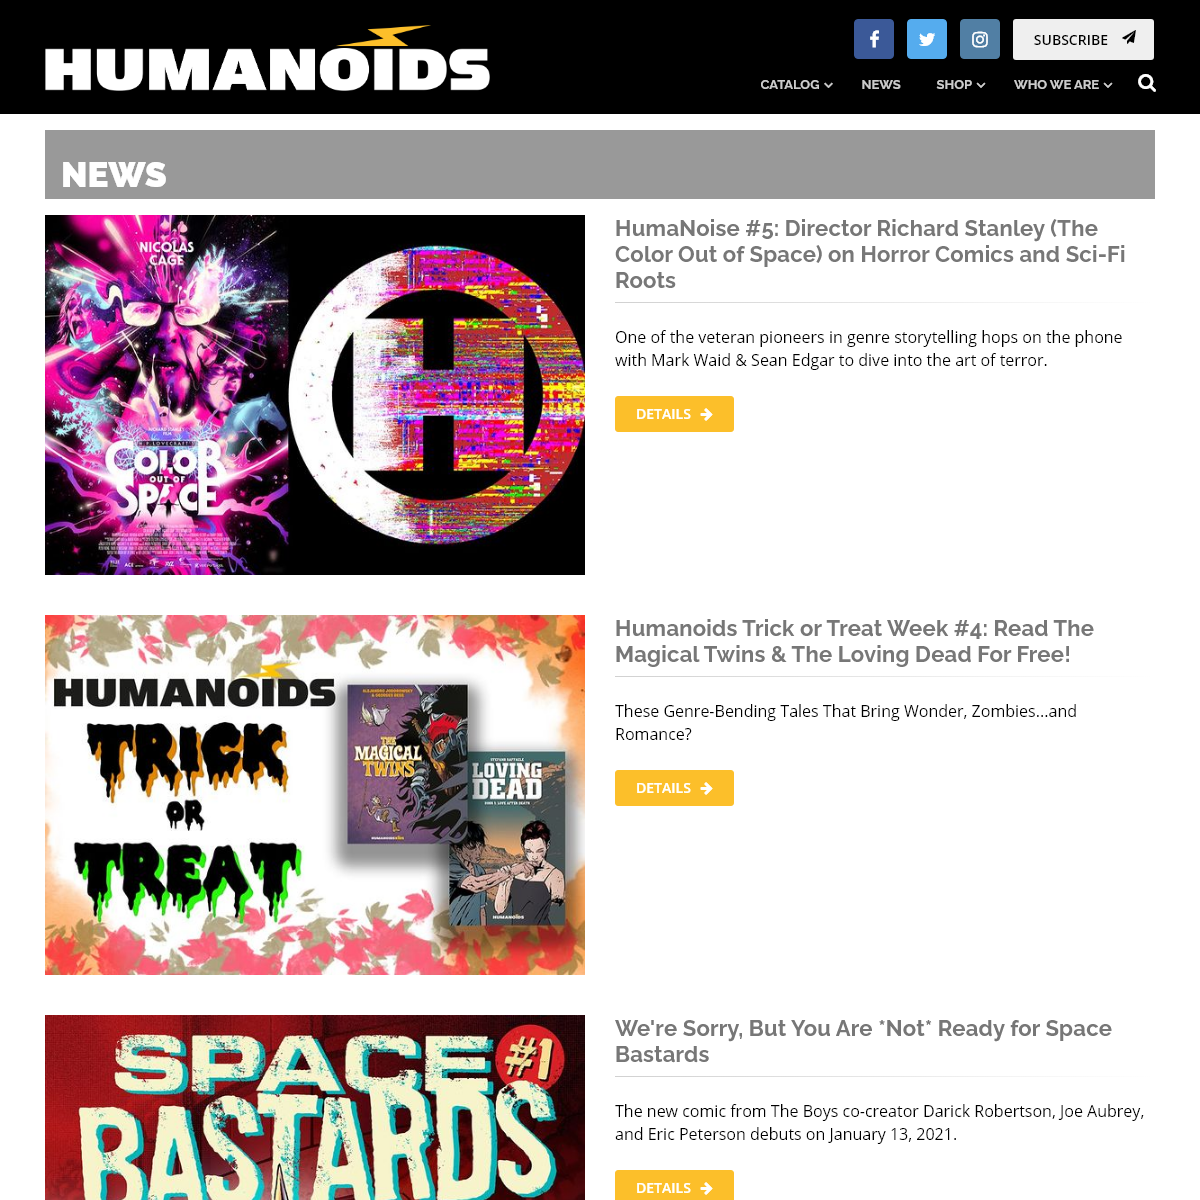 A complete backup of humanoids.com